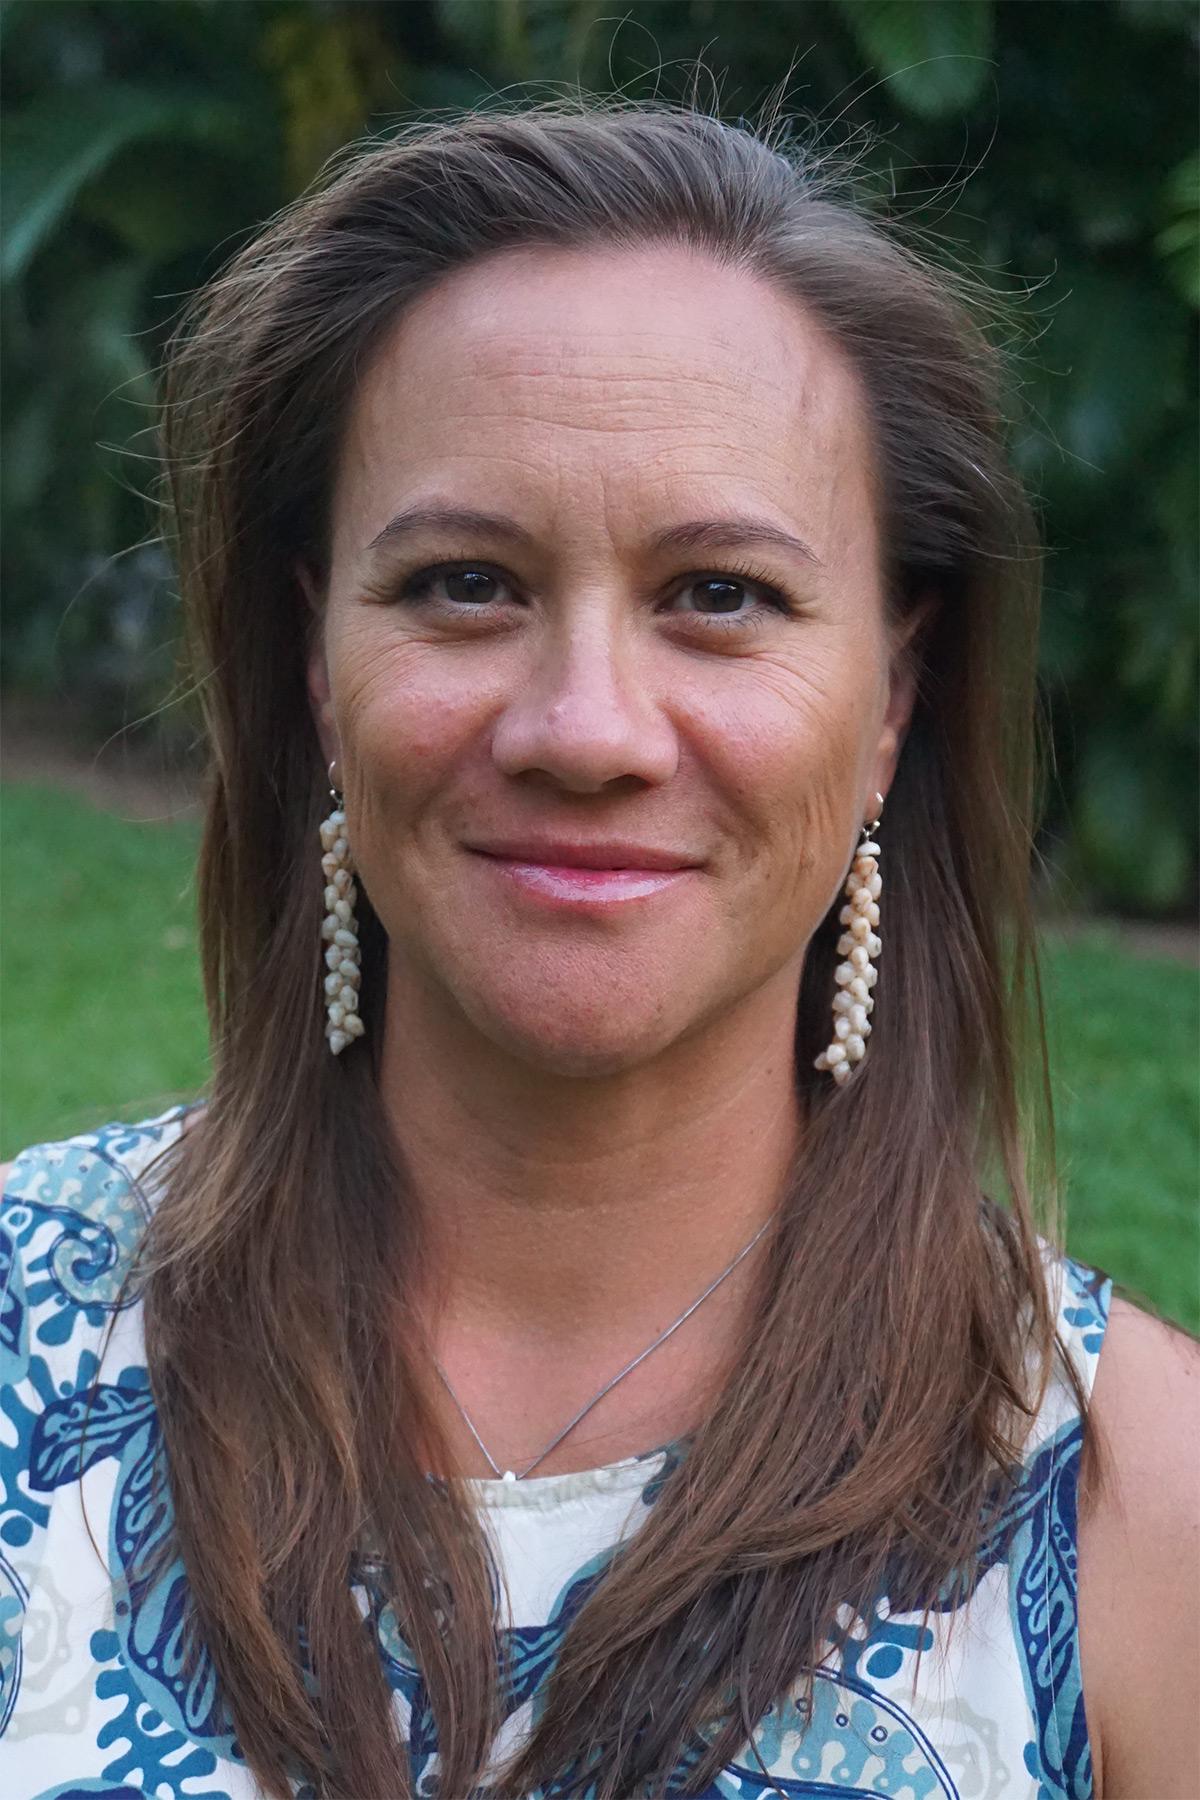 Portrait of a smiling middle-aged woman with shoulder-length brown hair, wearing large earrings and a floral top, standing outdoors.